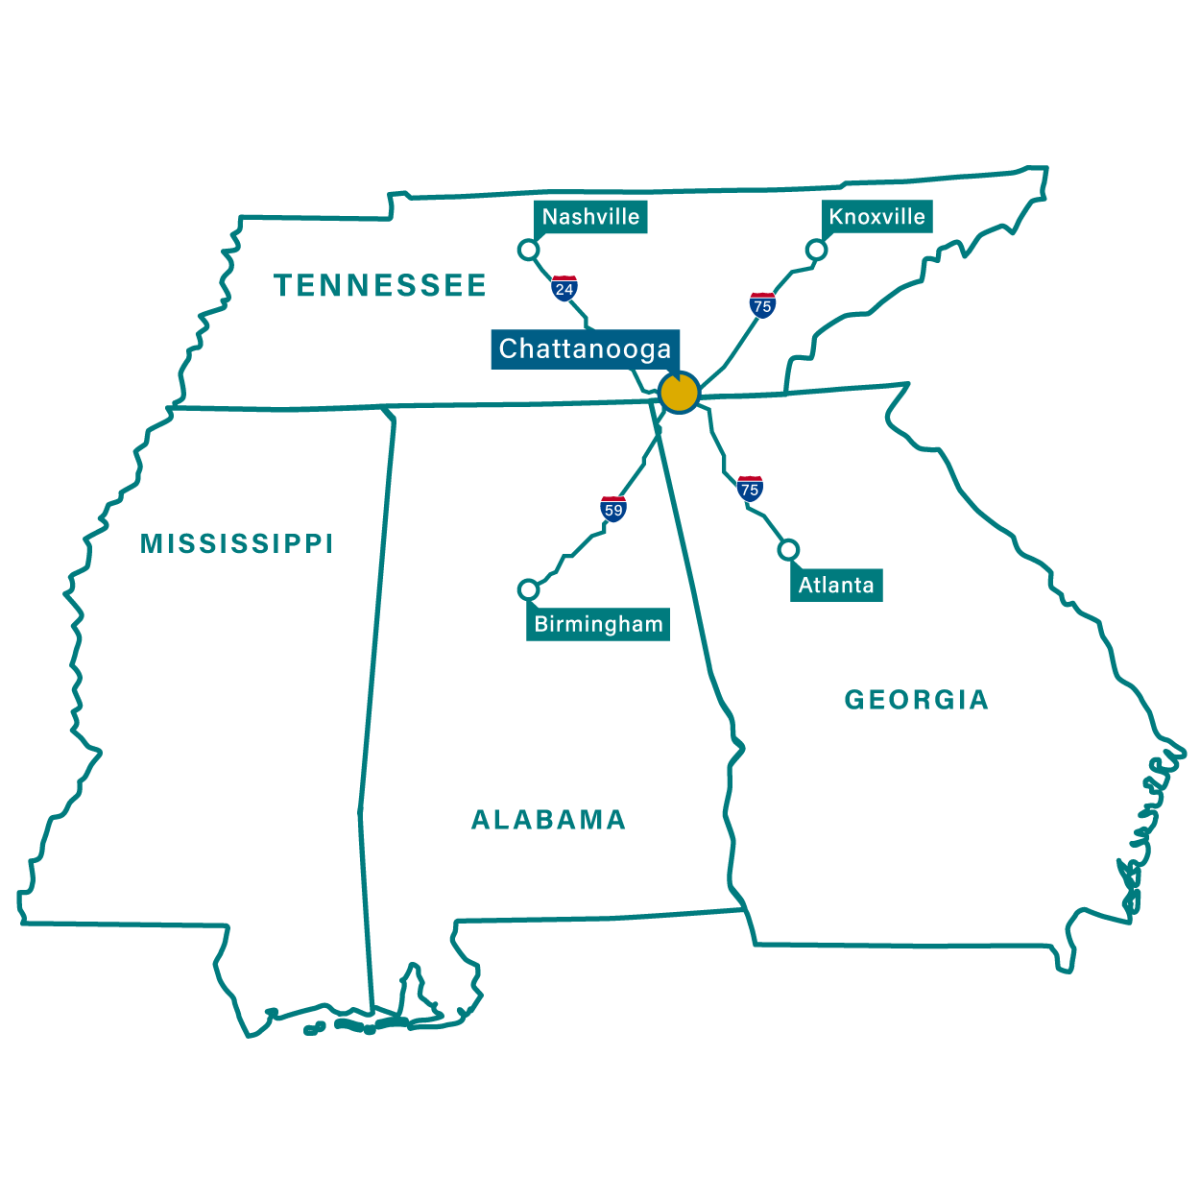 Regional map shows Chattanooga's location compared to Atlanta, Brimingham, Nashville, and Knoxville